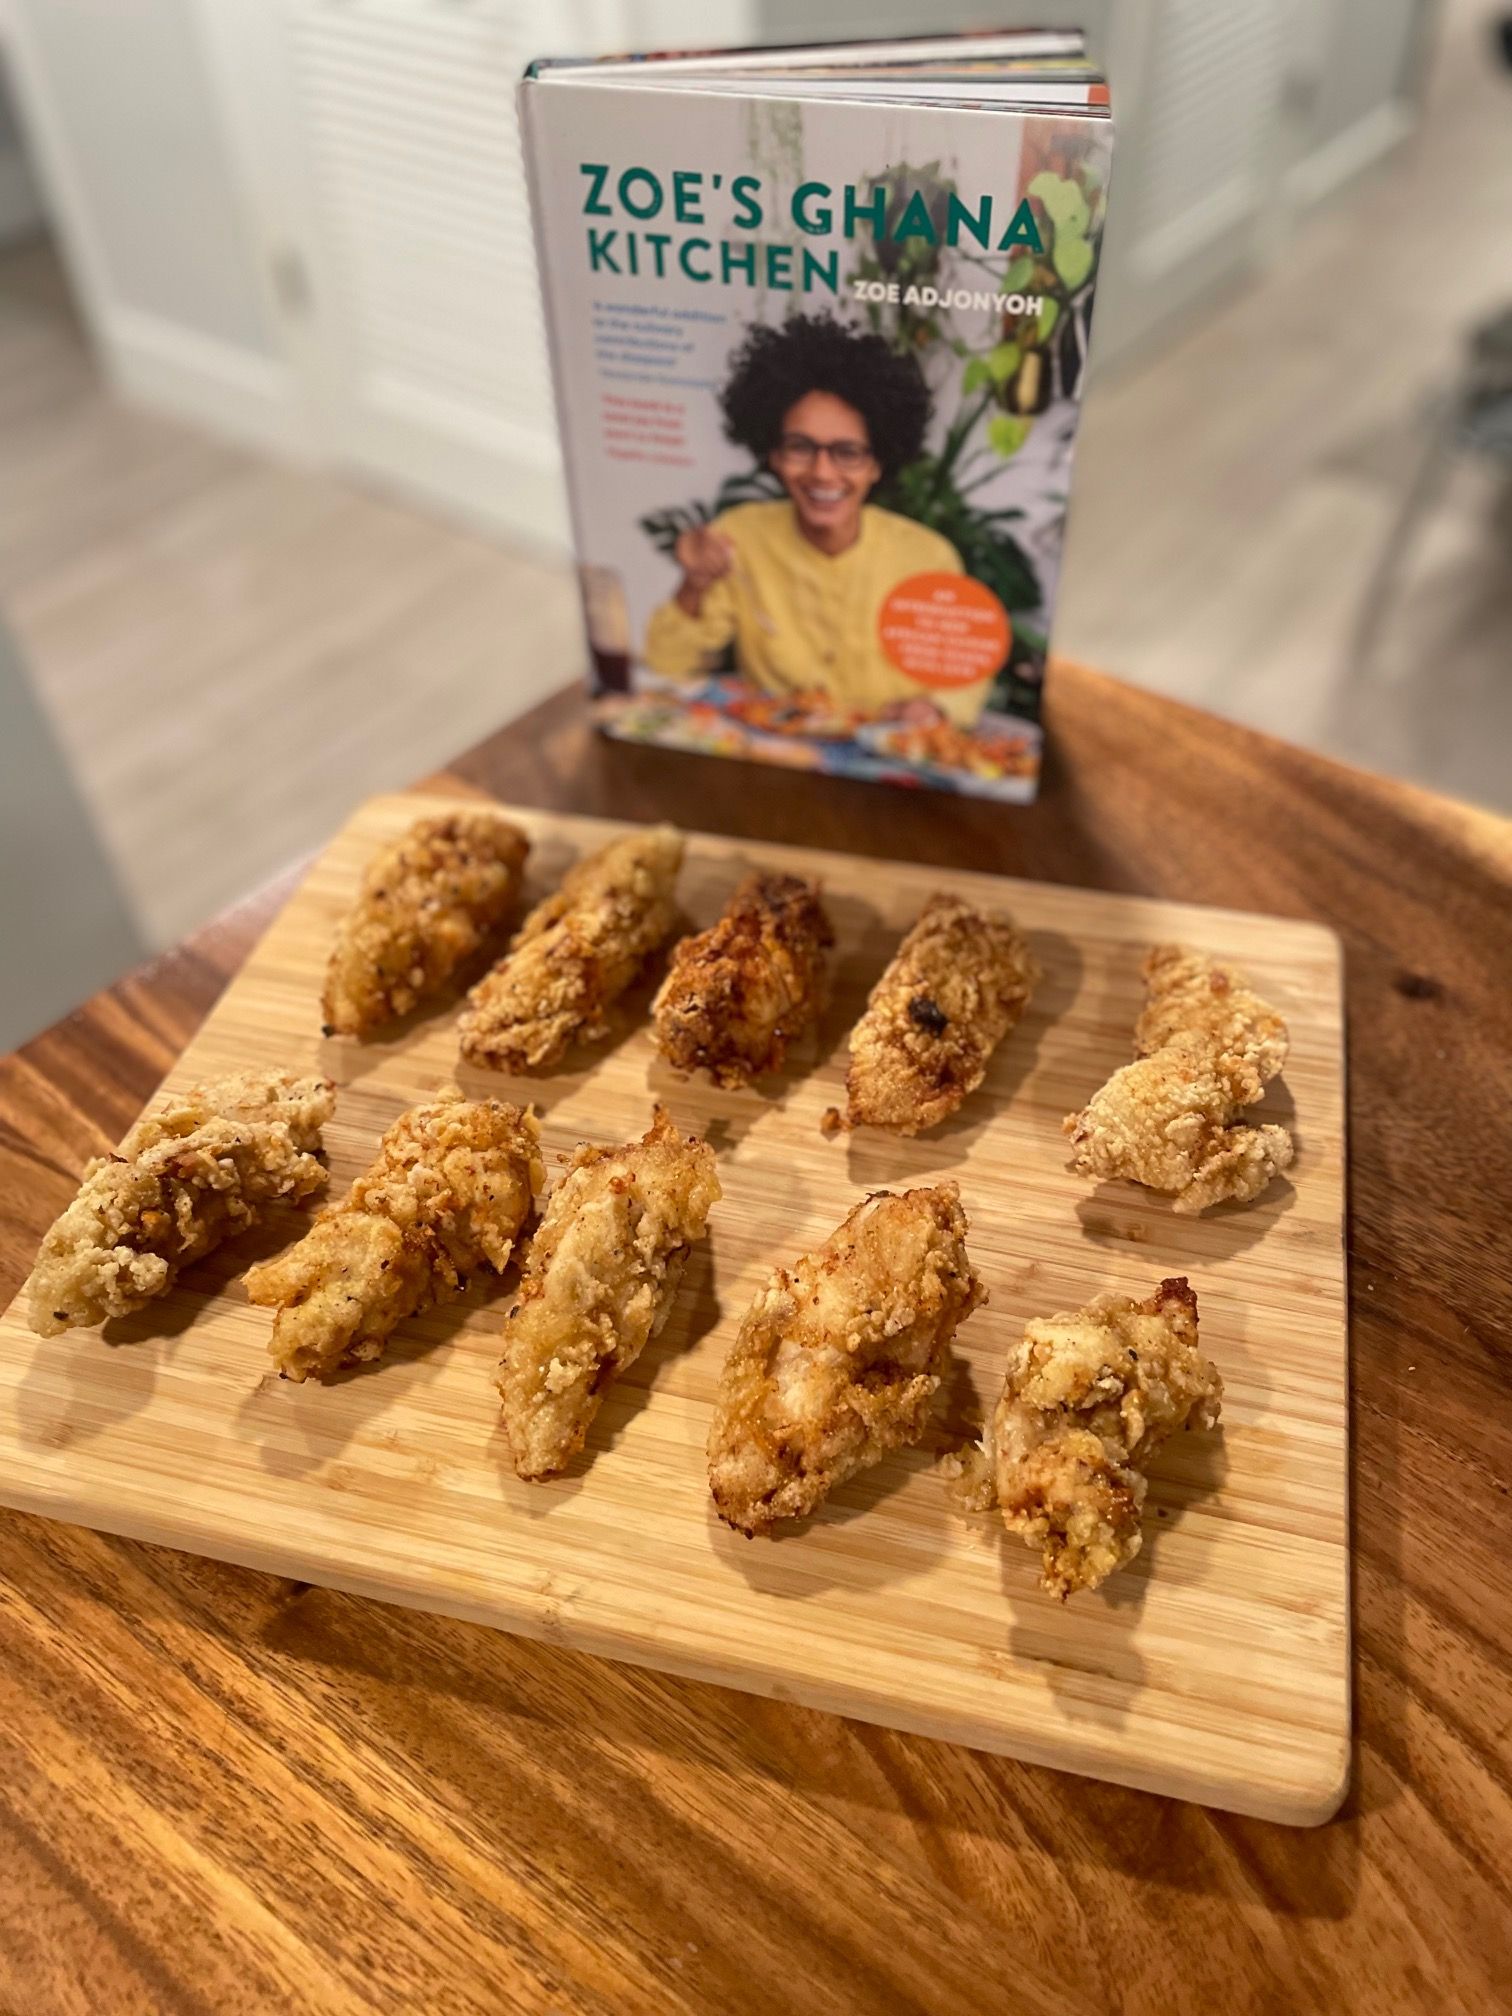 Fried chicken breast strips on a wooden cutting board in front of the cookbook Zoe's Ghana Kitchen